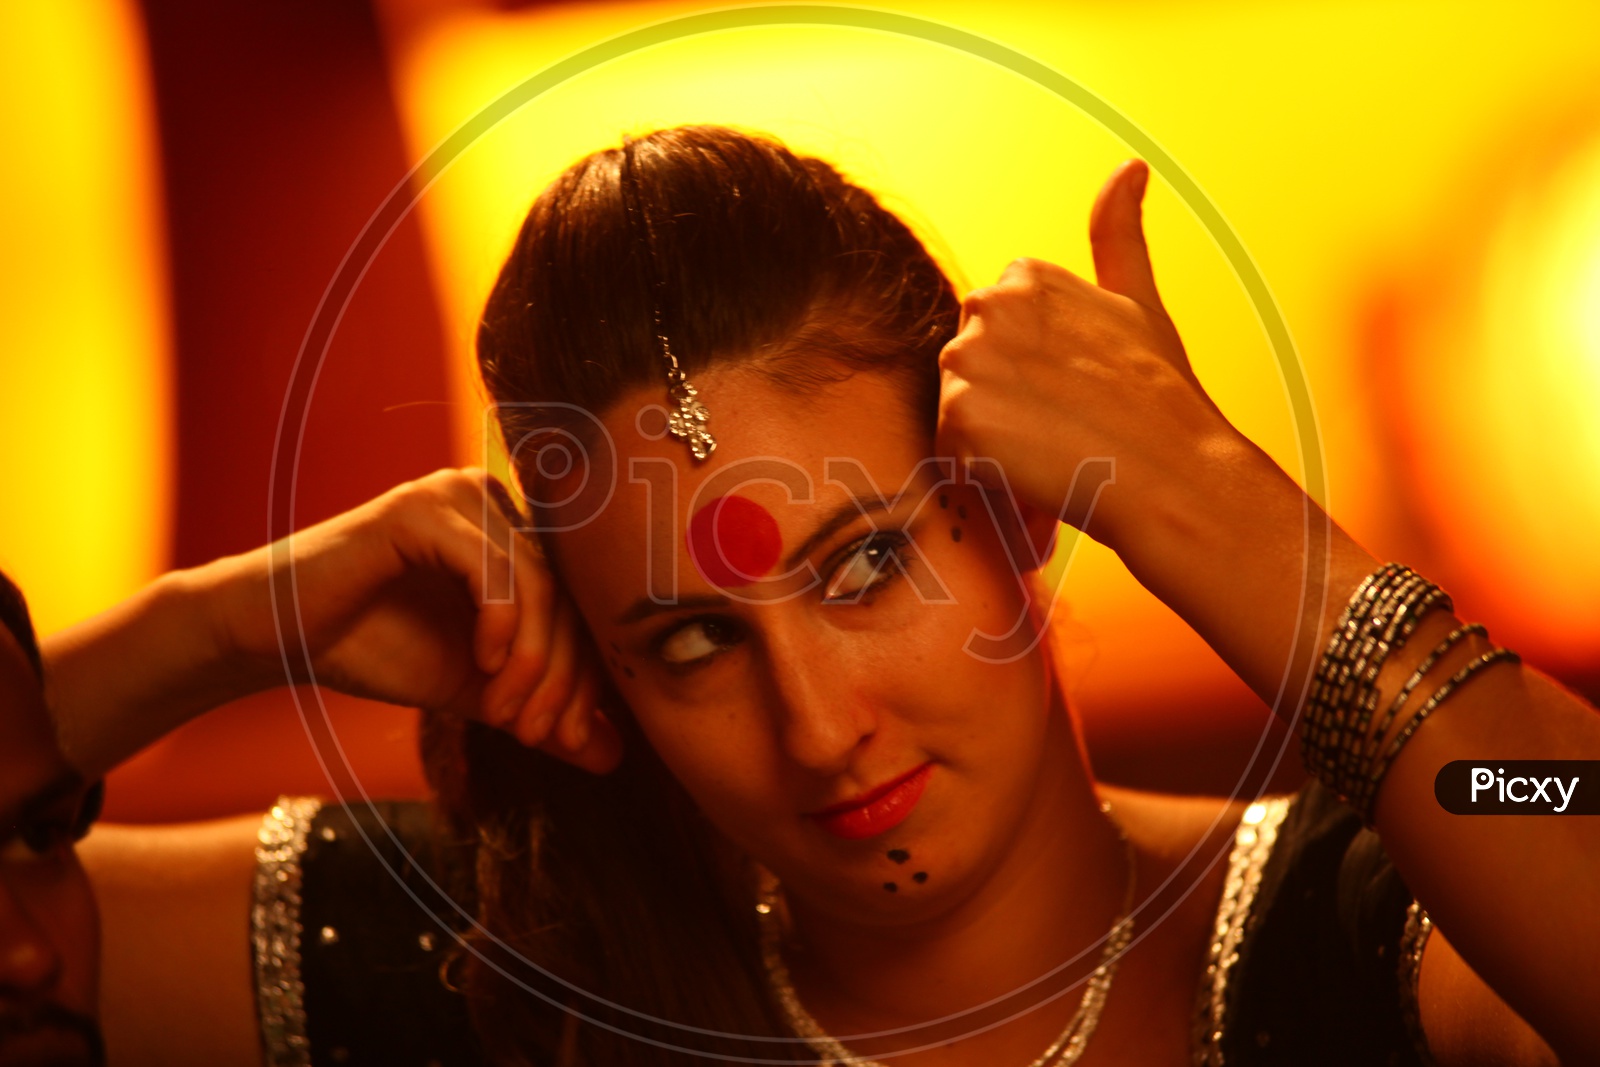 A Foreign Female Dancer in an Indian Woman Makeup In a Movie Shooting